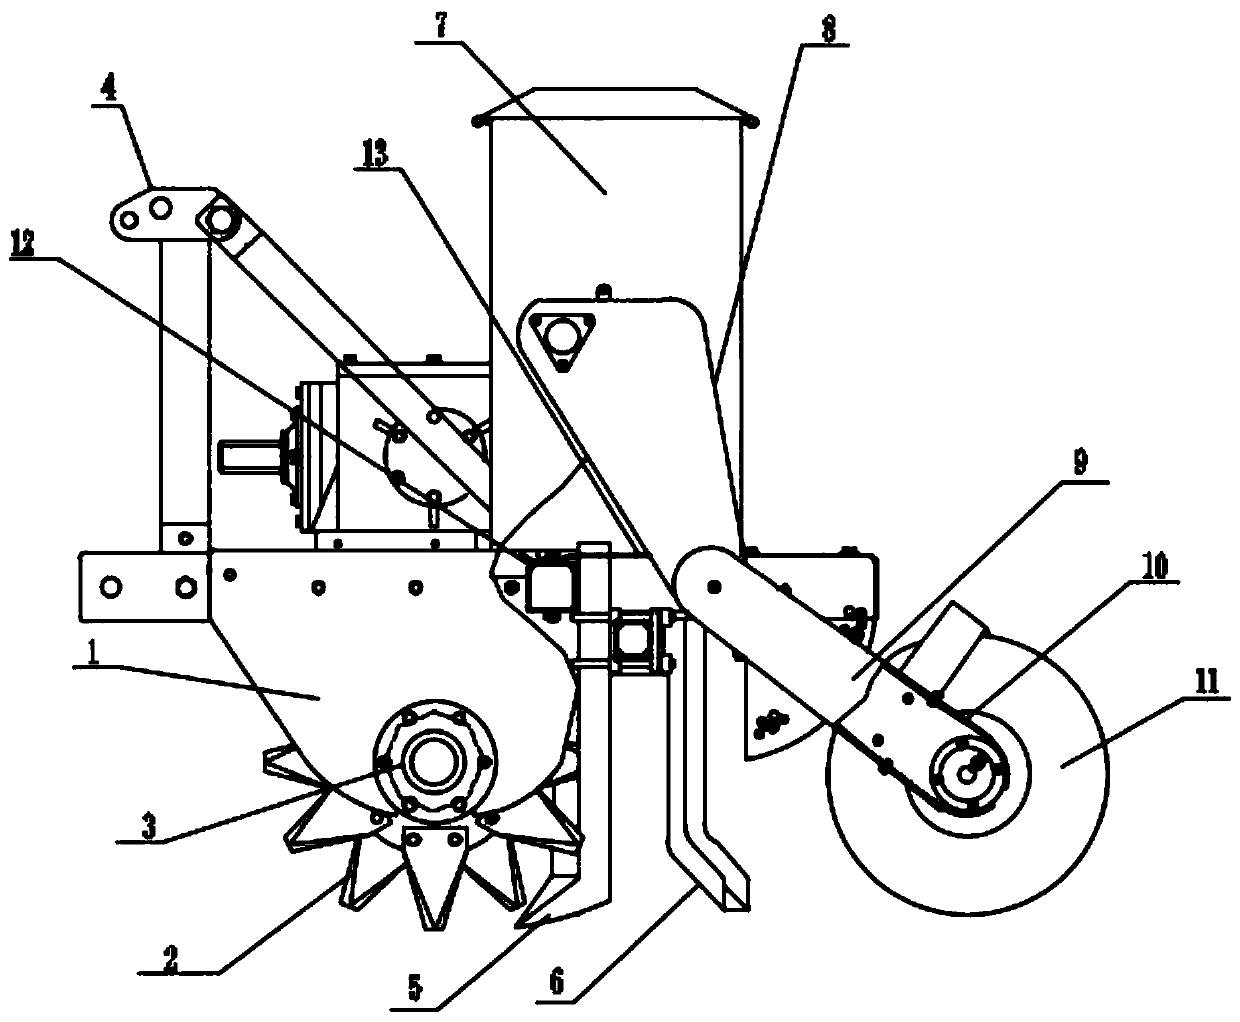 Integrated fertilizing and seeding device for agriculture